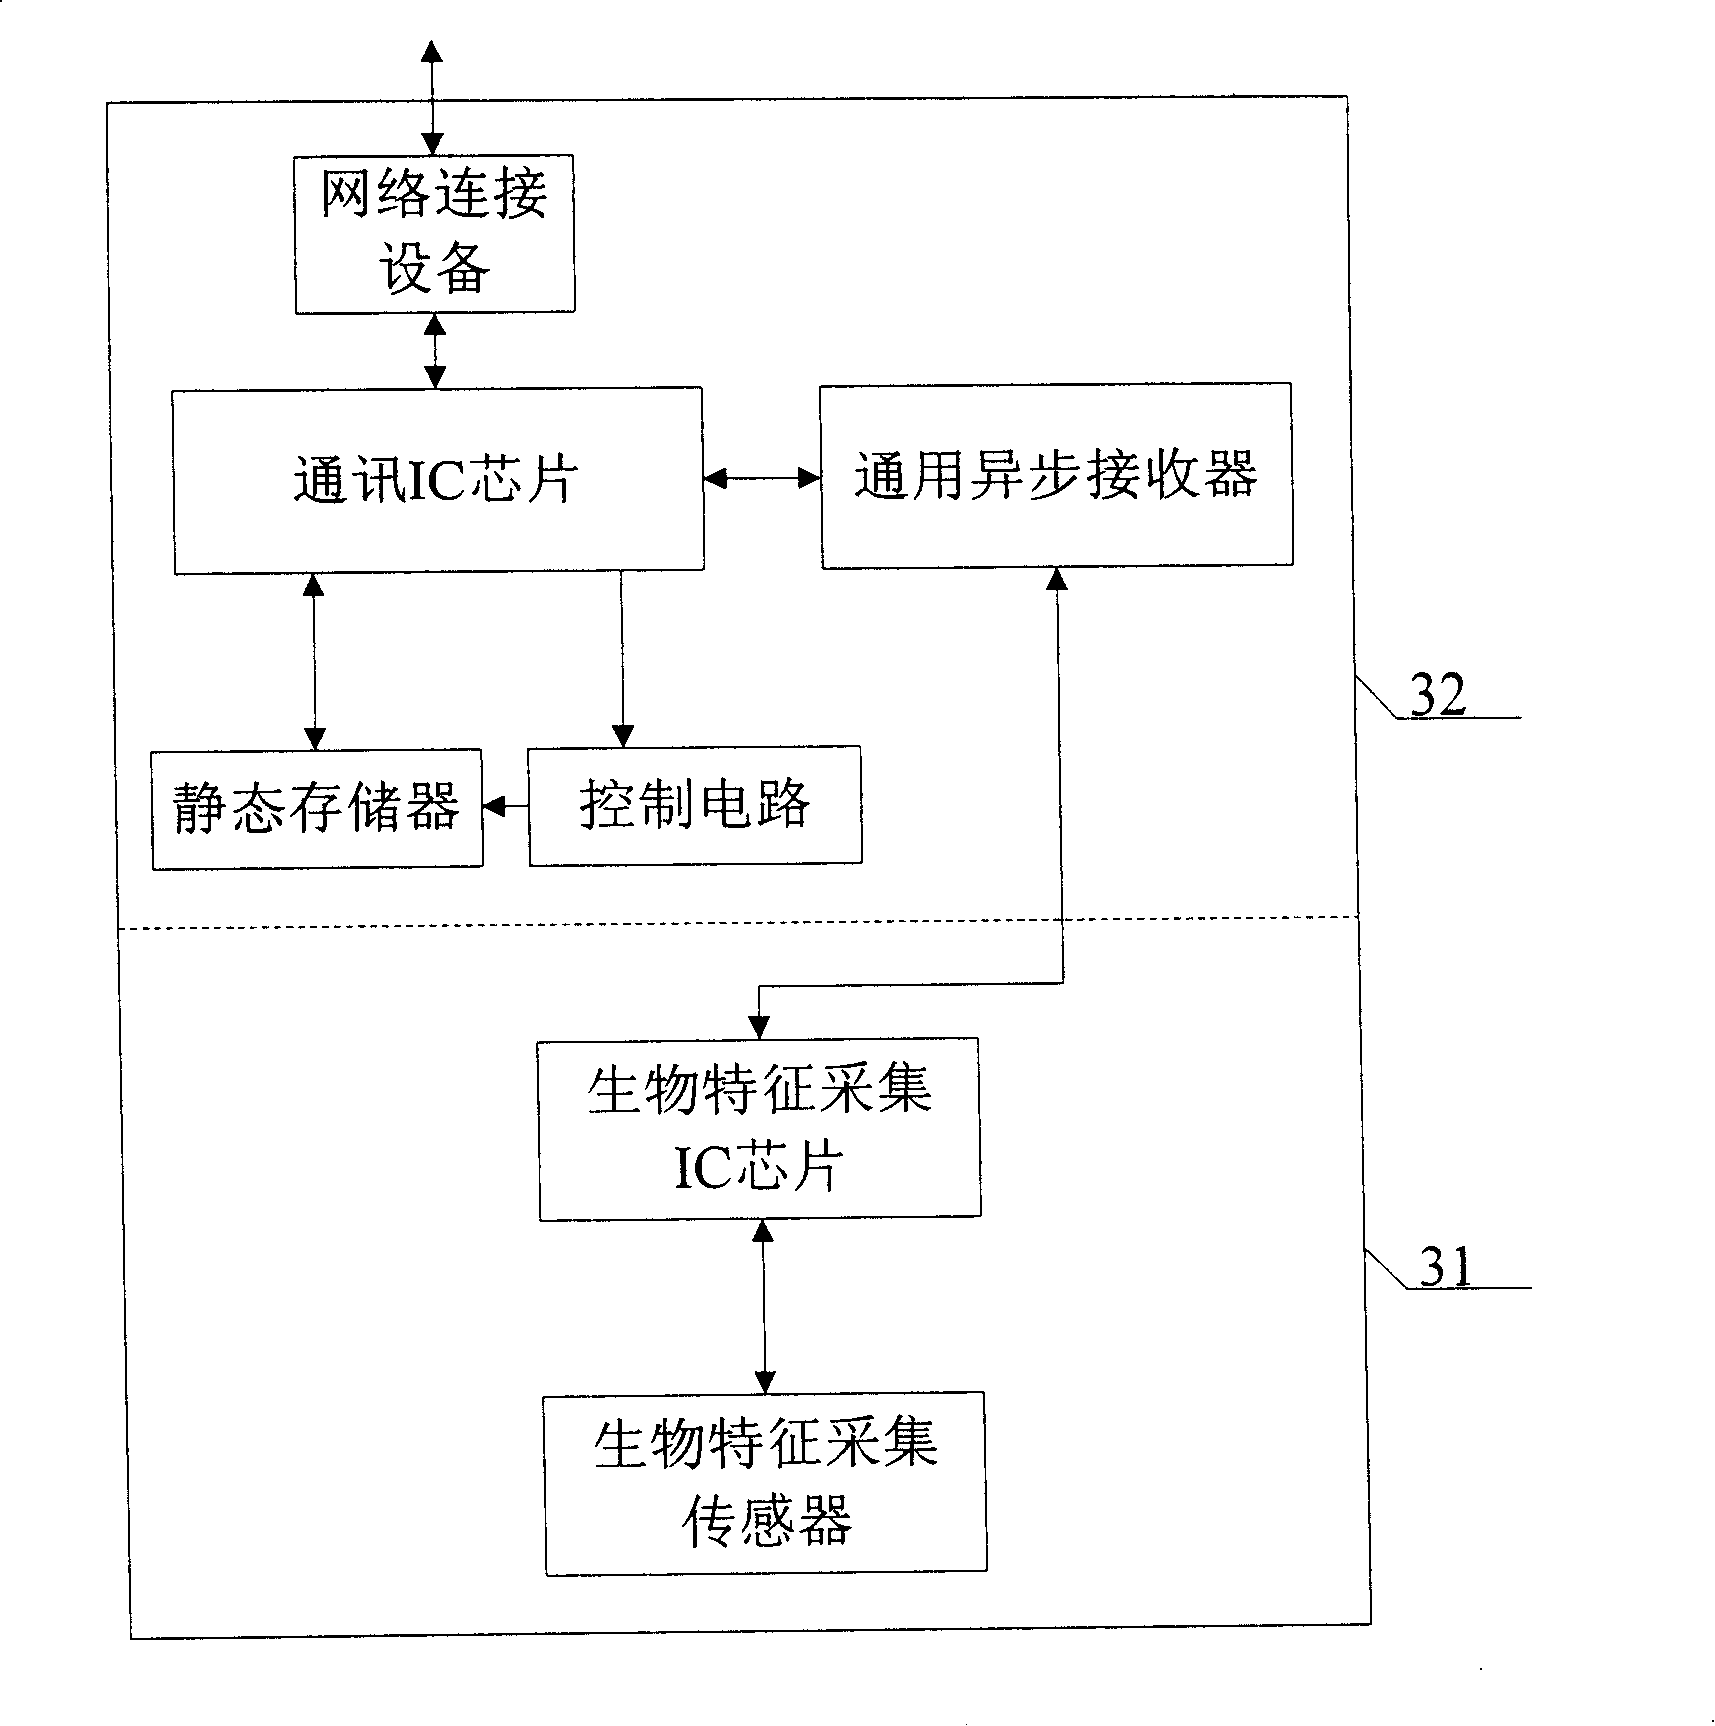 Method and system of remote network identification authenticating based on multiple biology characteristics